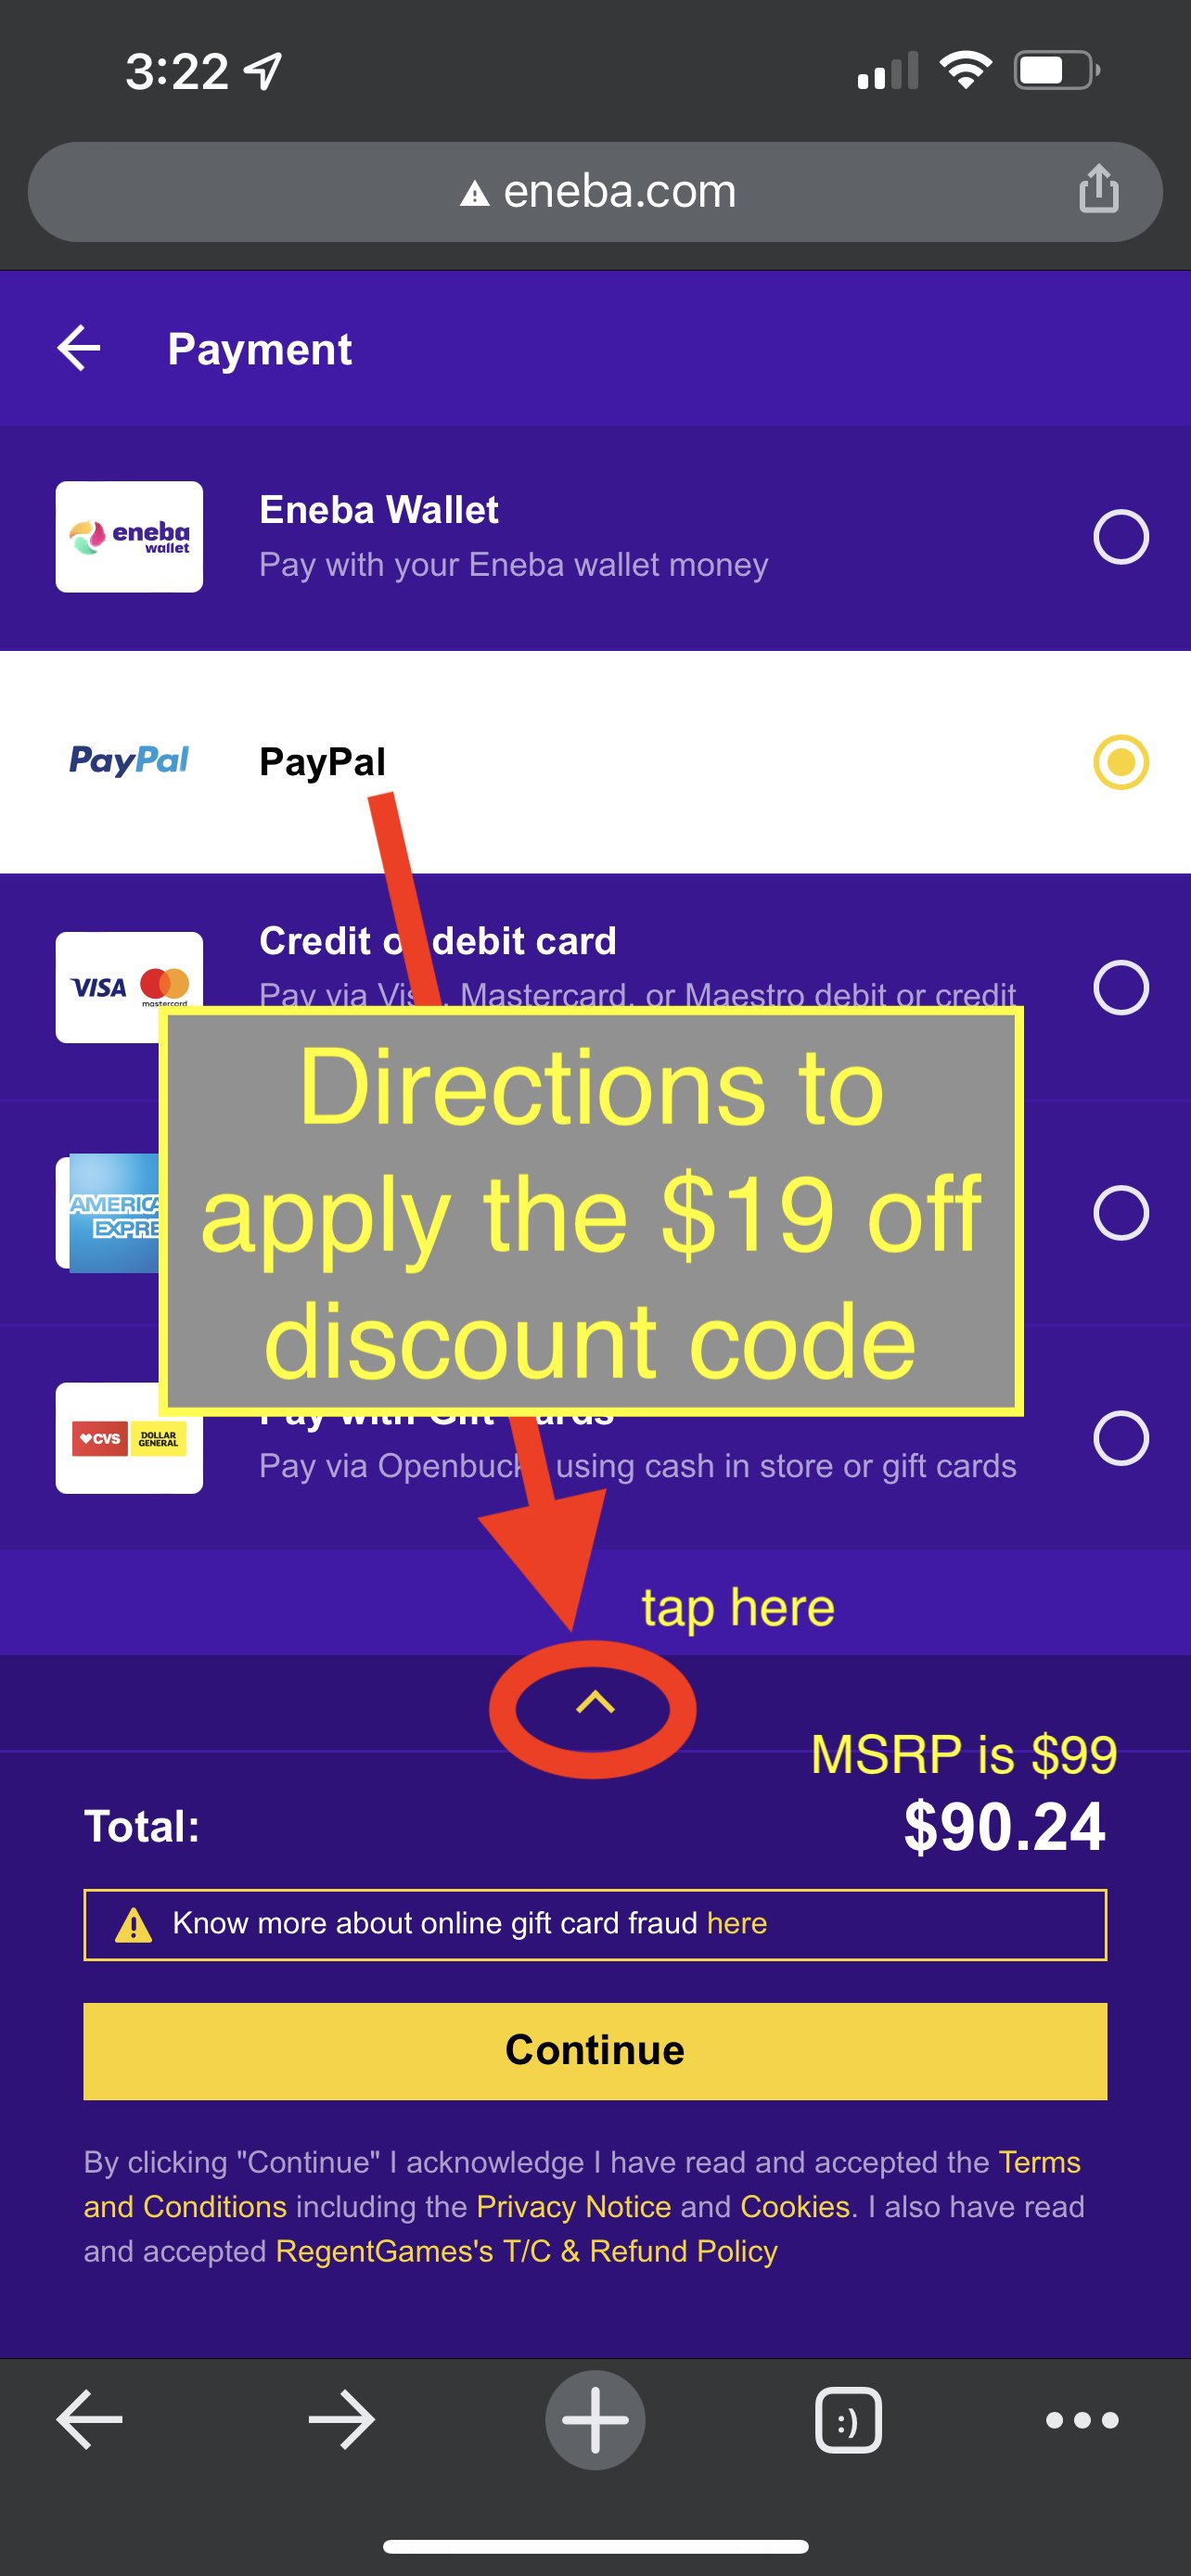 Derive Bevidst Udstyre The Shortcut on Twitter: "🍄$20 off: Get a $99 Nintendo gift card for $79  1️⃣Go to https://t.co/UaB2JpxrmG 2️⃣Add discount code: 99N *on mobile, tap  yellow ^ in middle to reveal promo field